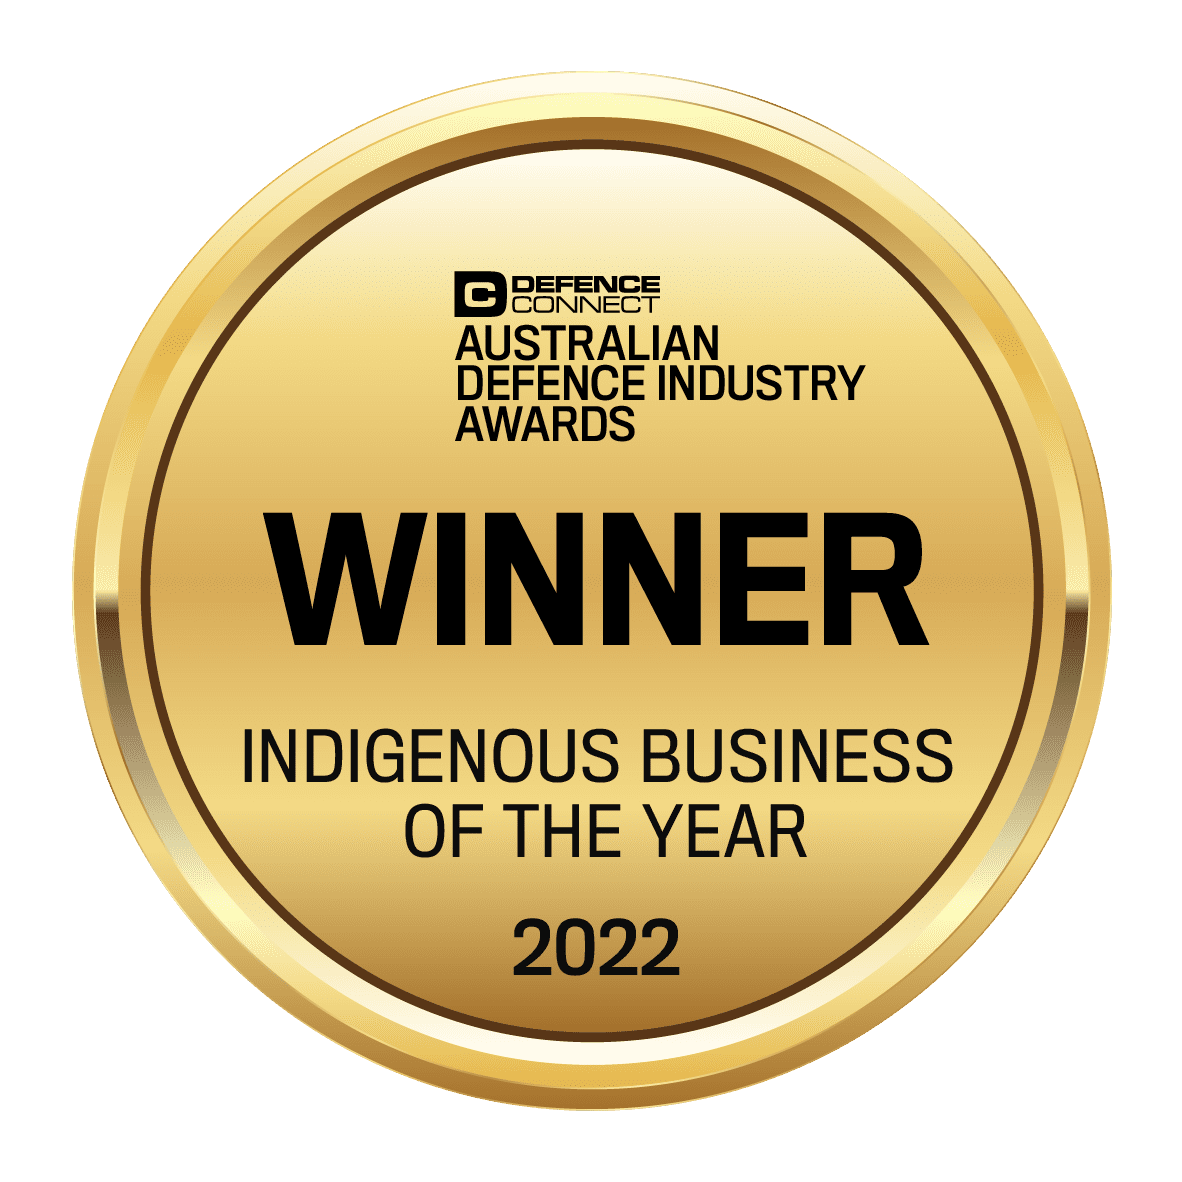 Australian Defence Industry Awards - Winner of the Indigenous Business of The Year 2022